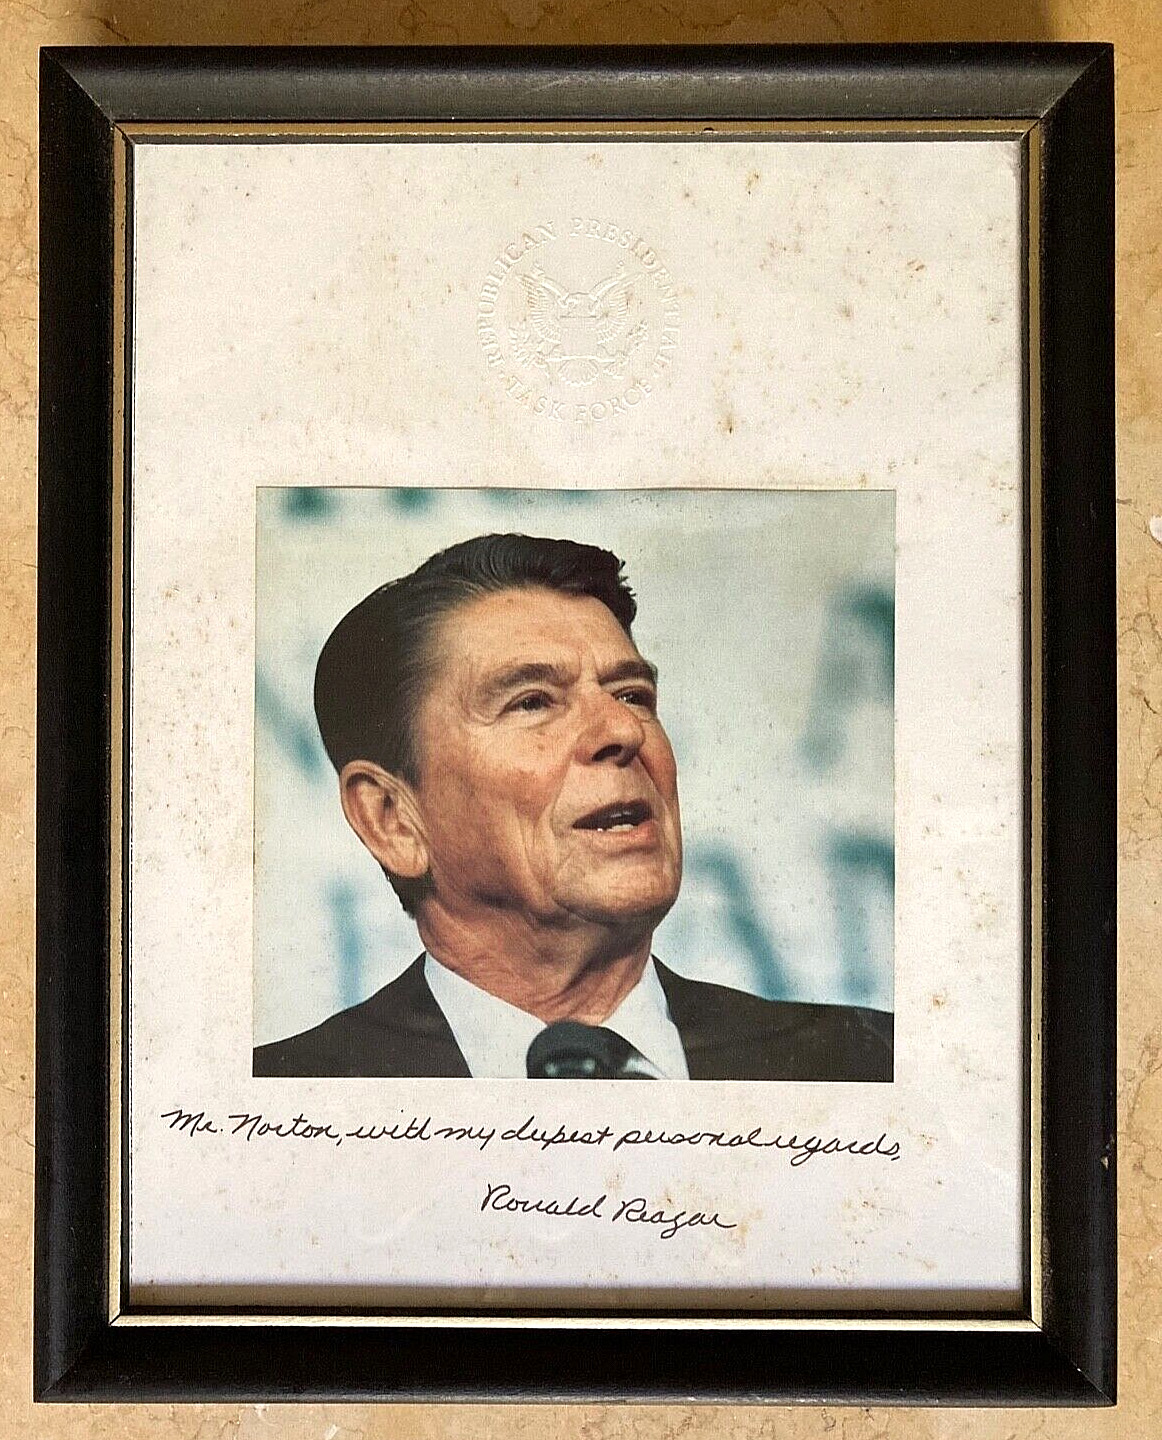 PRESIDENT RONALD REAGAN INSCRIBED AUTOGRAPHED PRESIDENTIAL TASK FORCE CERTIFICAT